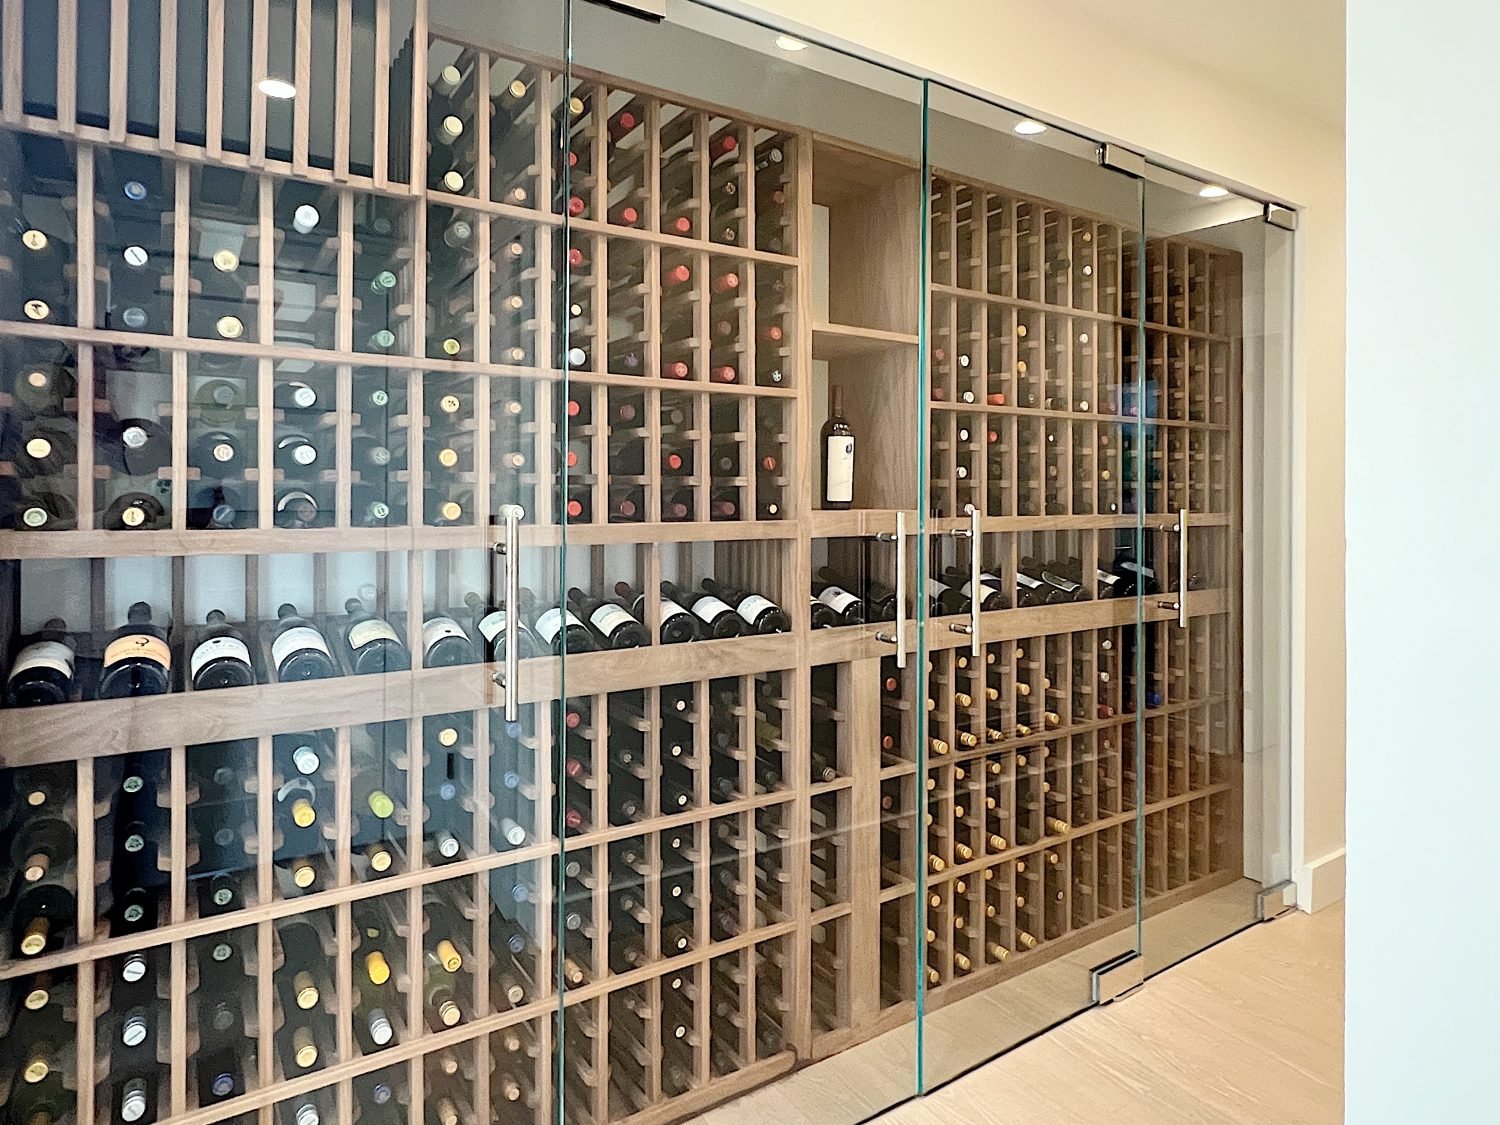 https://my100yearoldhome.com/wp-content/uploads/2023/07/How-We-Built-Our-Home-Wine-Cellar-at-the-Beach-House-.jpg